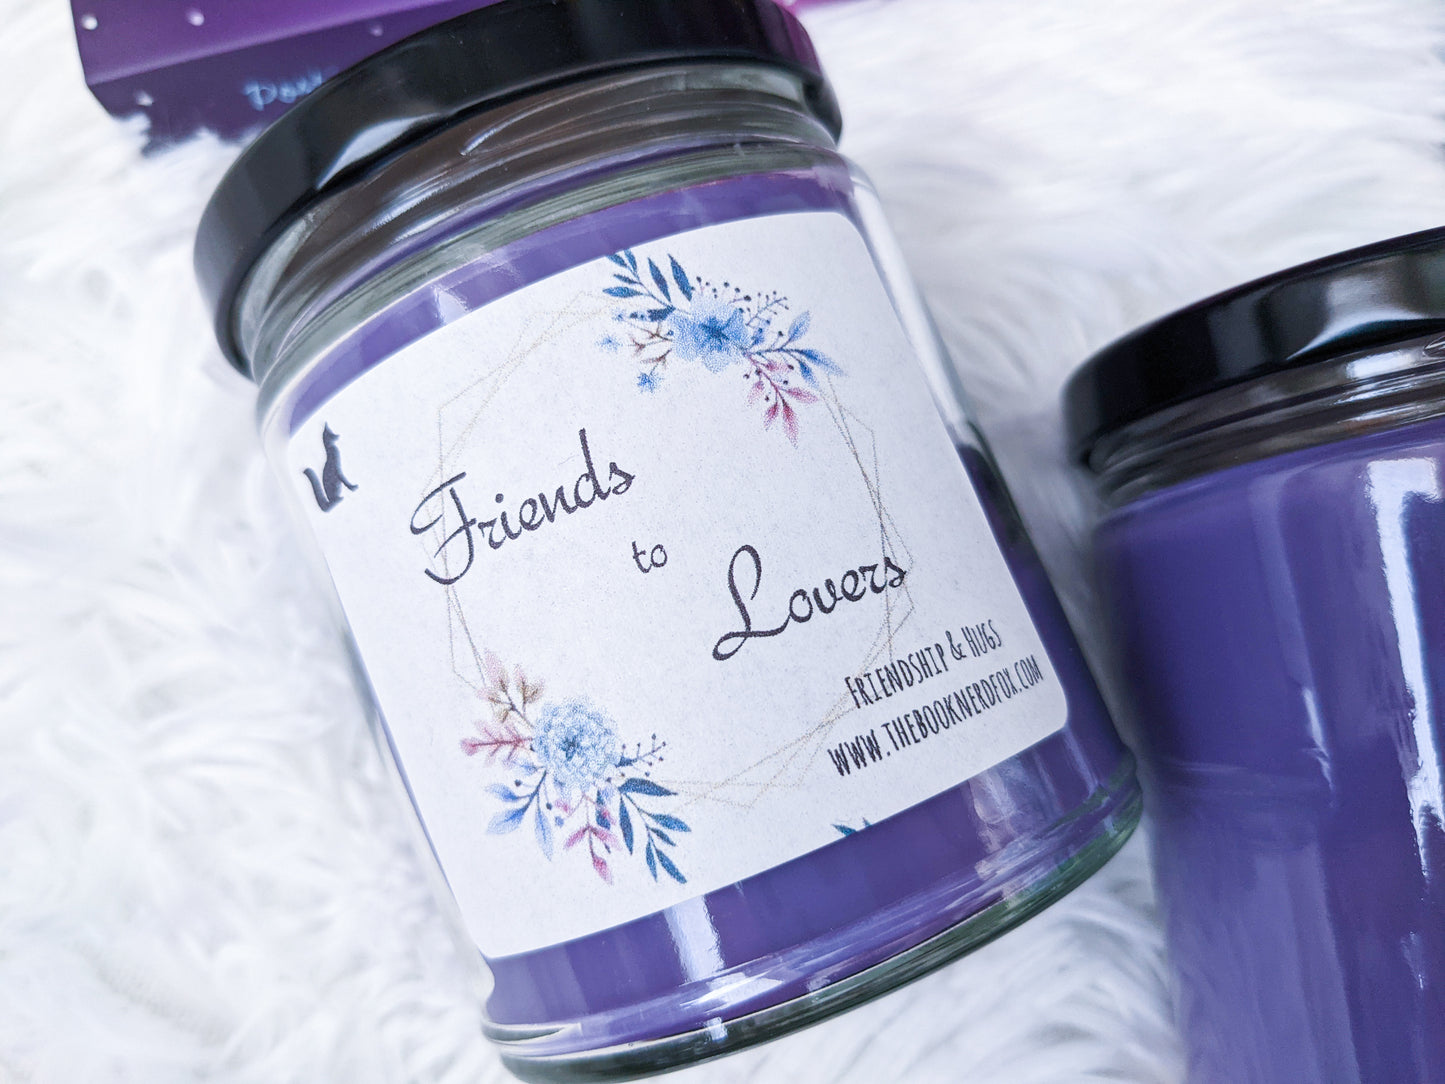 Friends to Lovers - Sandalwood & Almond Cake